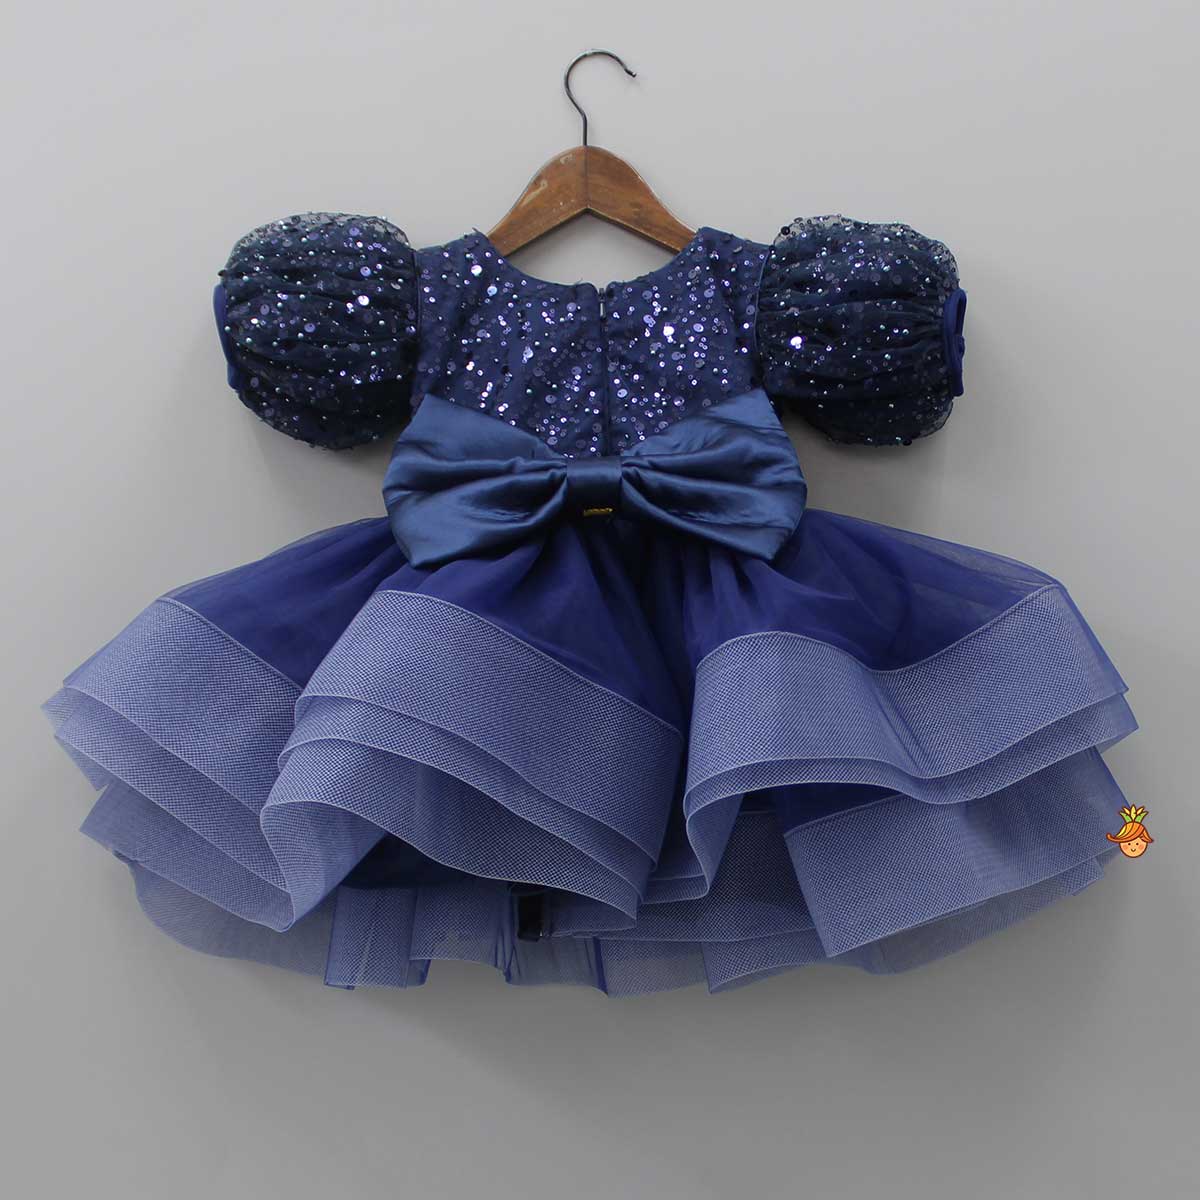 Sequined Ruffled Blue Dress With Bows And Matching Swirled Bow Headband